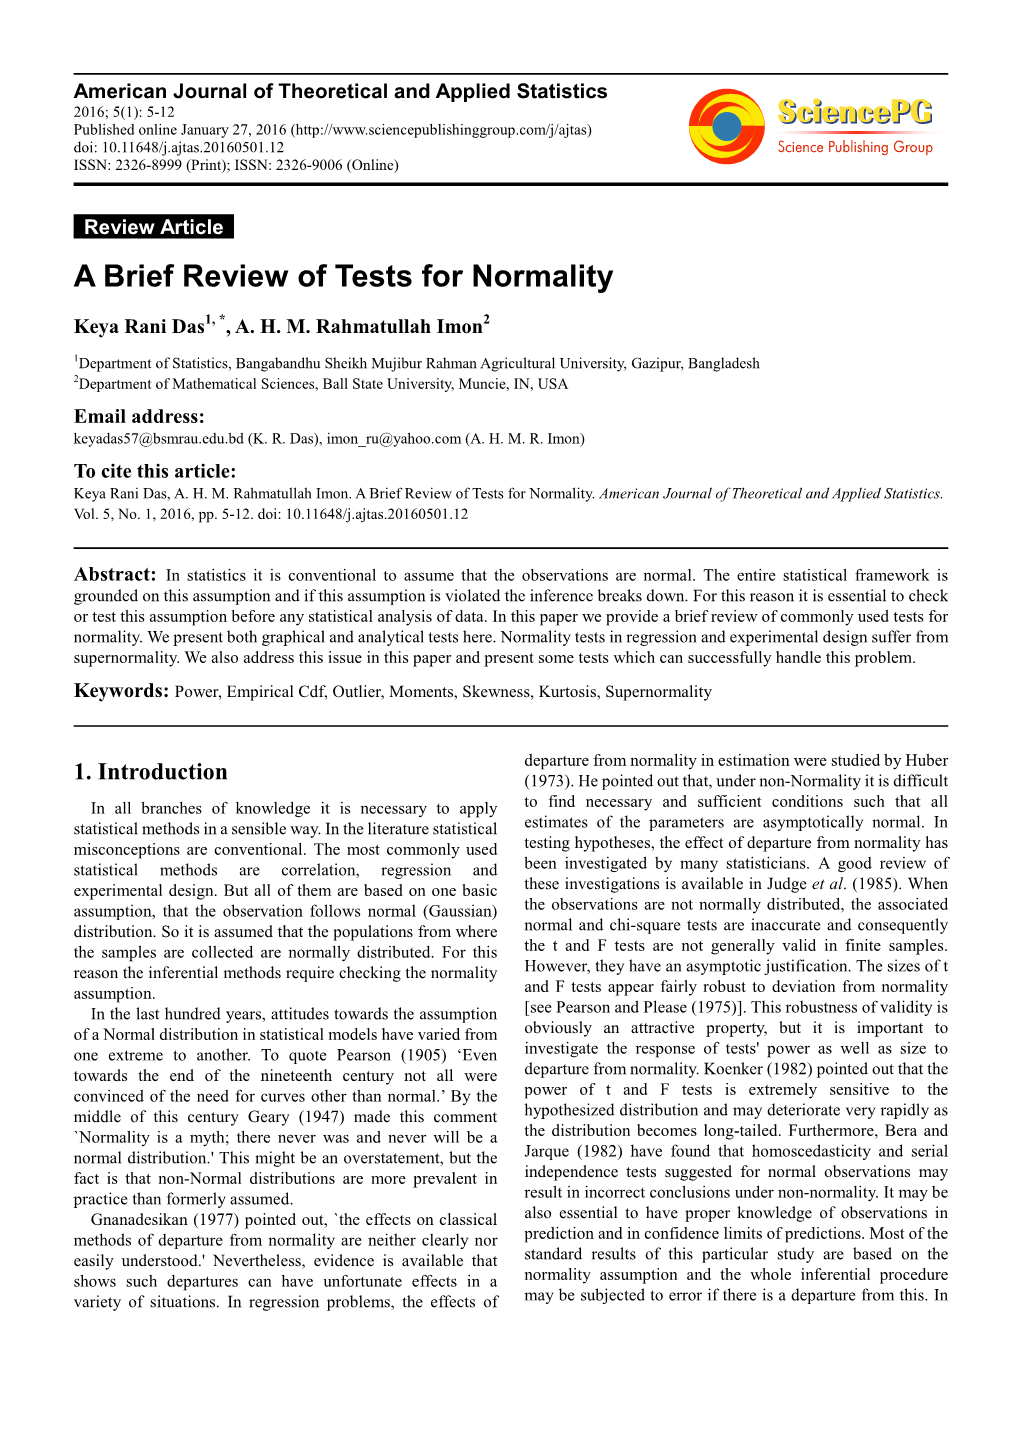 A Brief Review of Tests for Normality